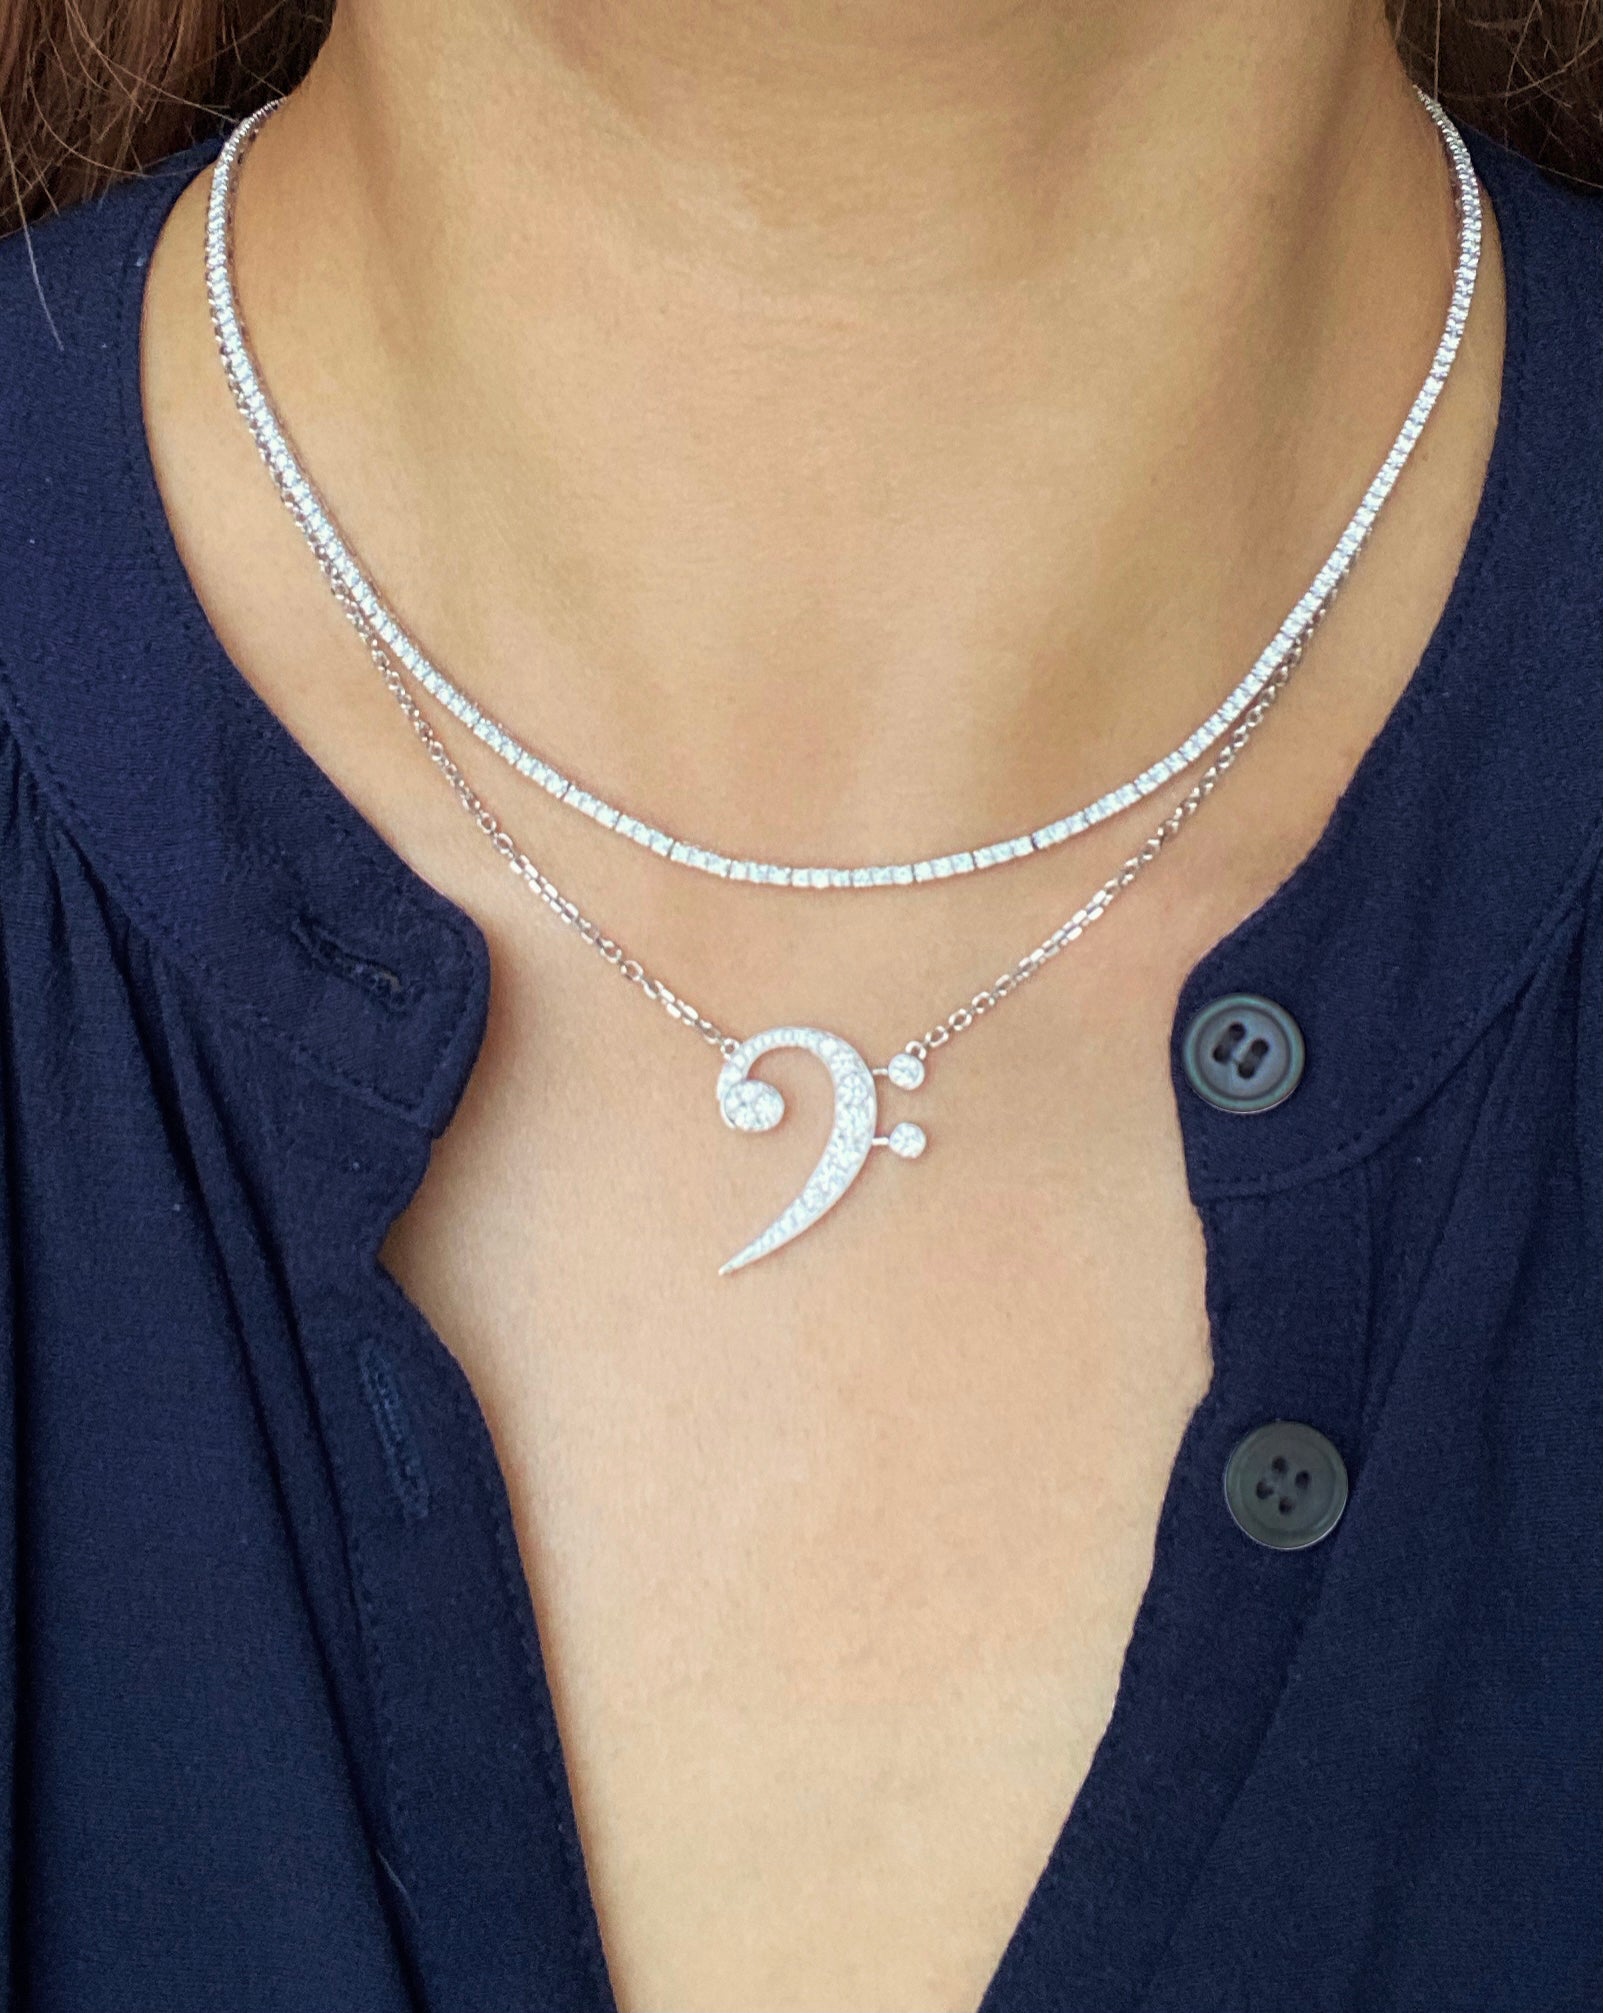 Bass Clef Diamond Necklace in 18K White Gold